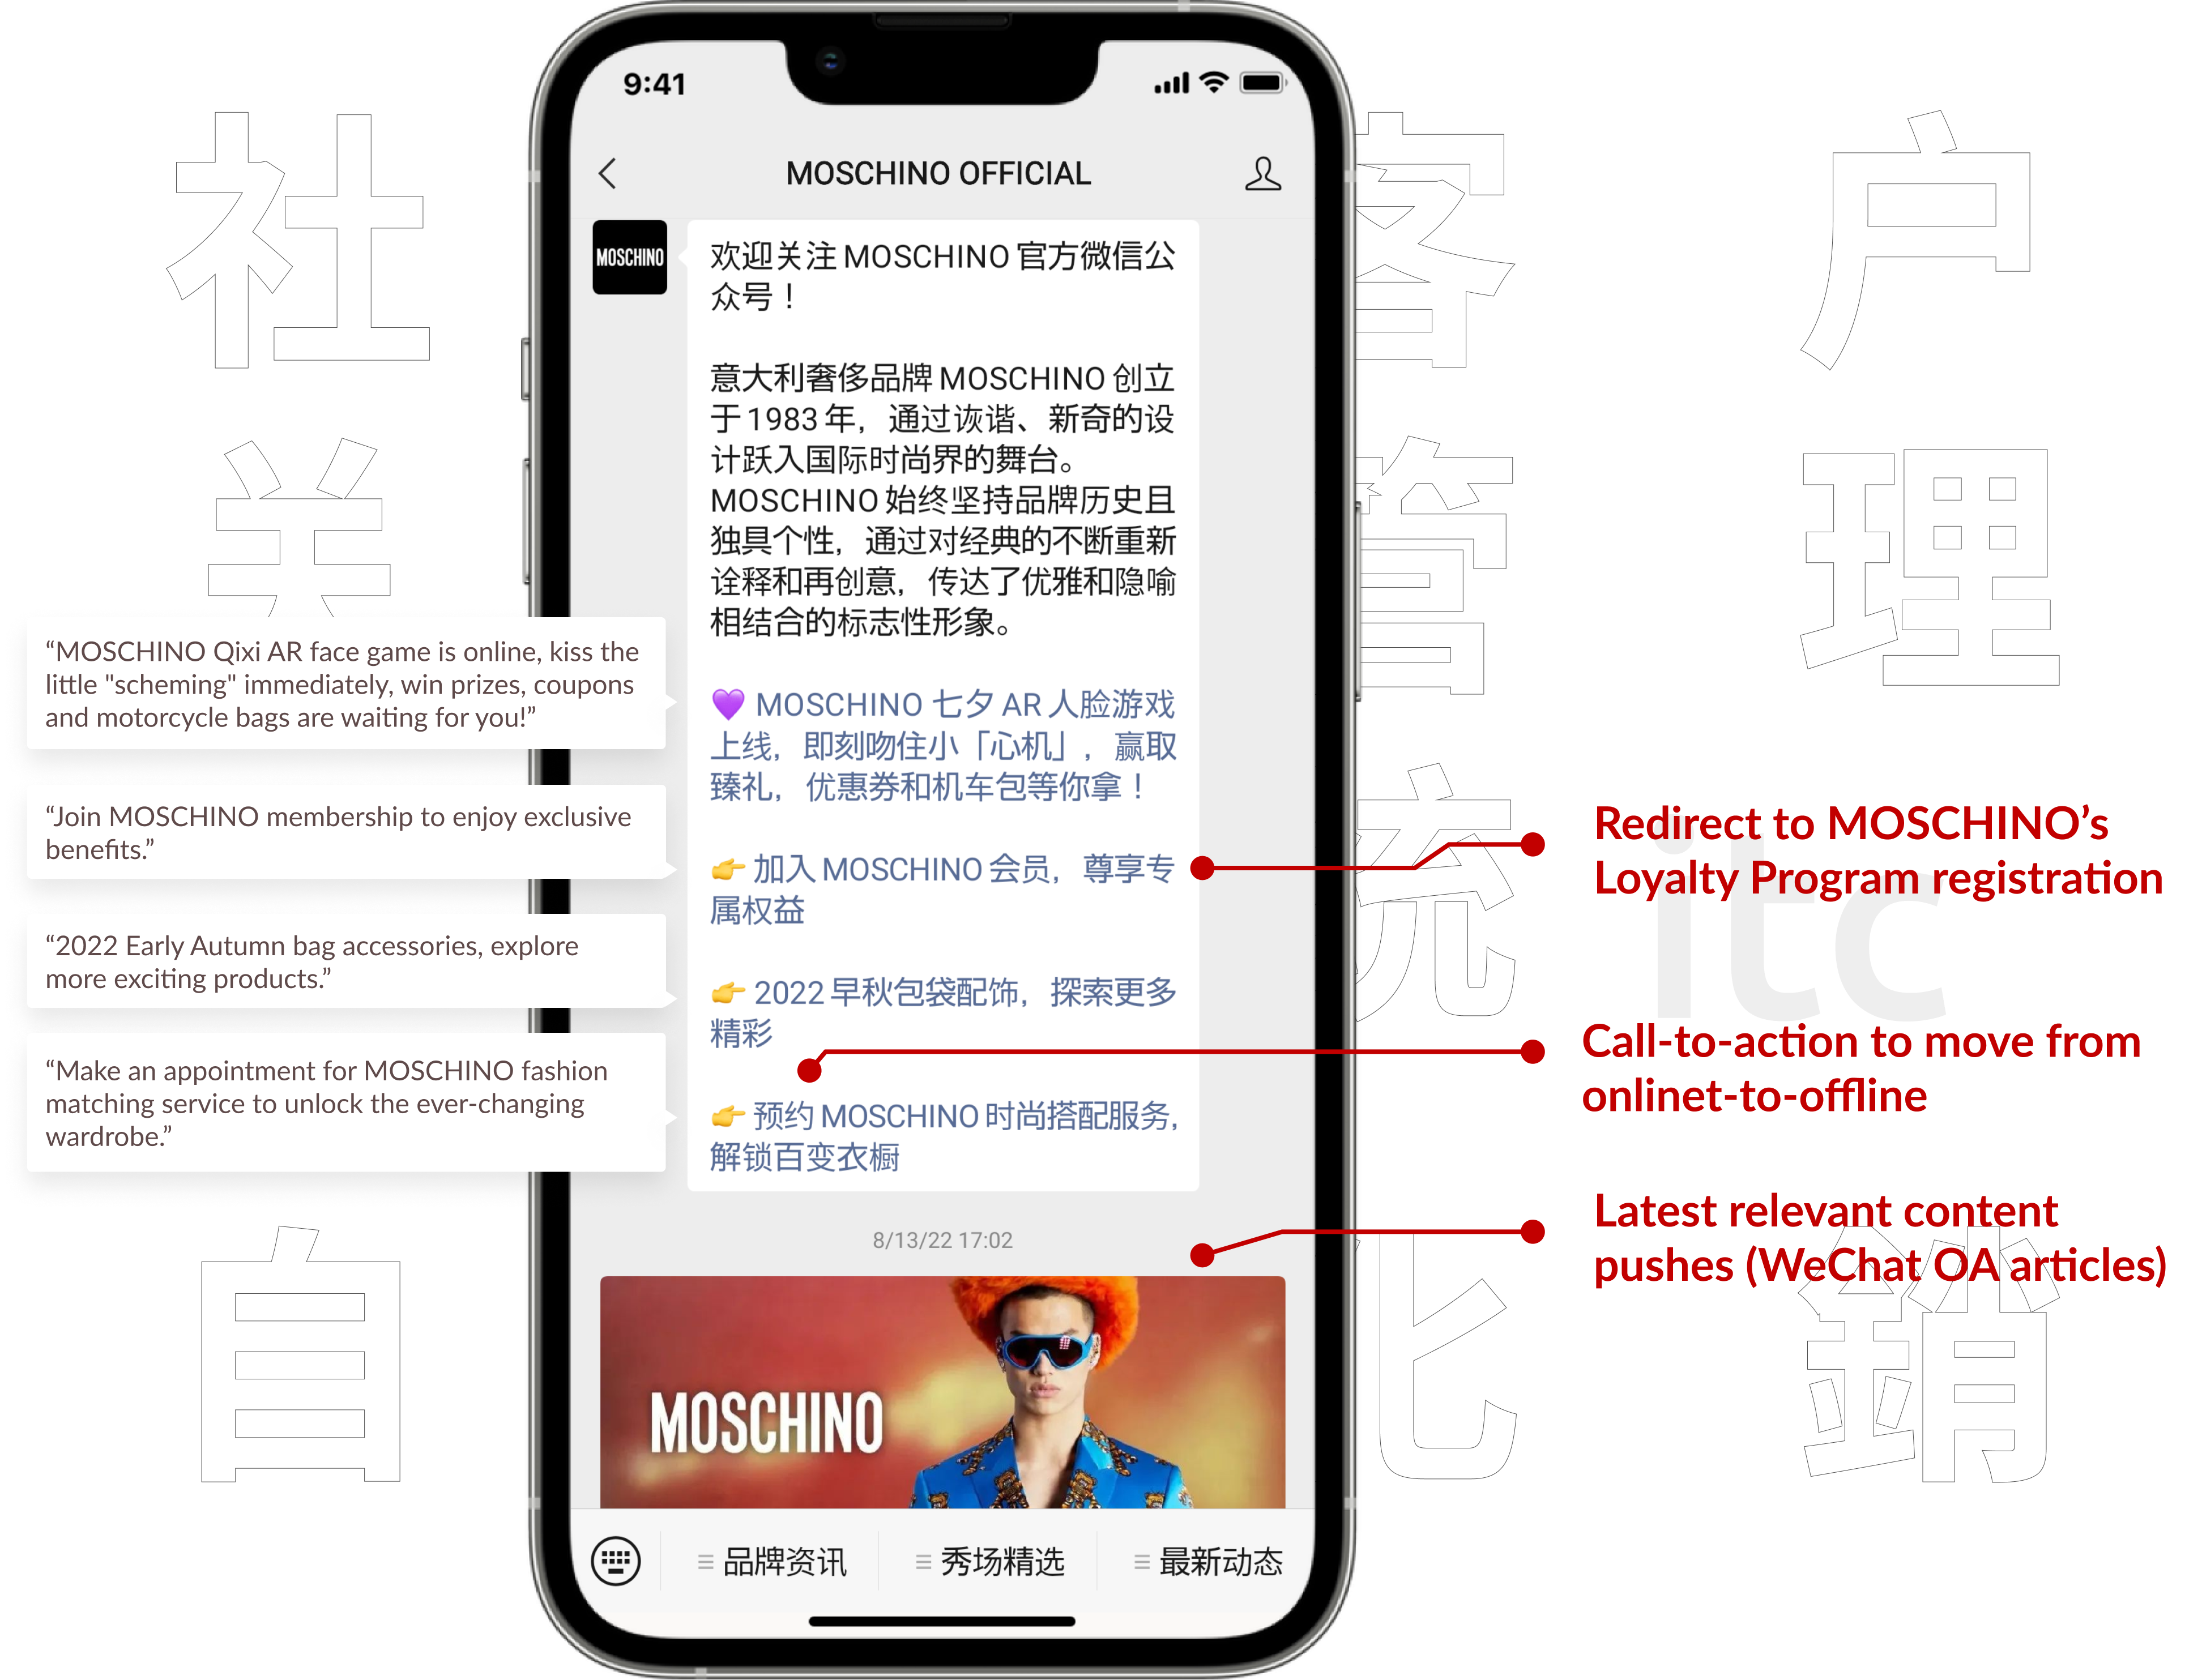 Moschino can leverage marketing automation and social CRM tools to effectively capture data and nurture leads with personalized message/content push via its WeChat Official Account